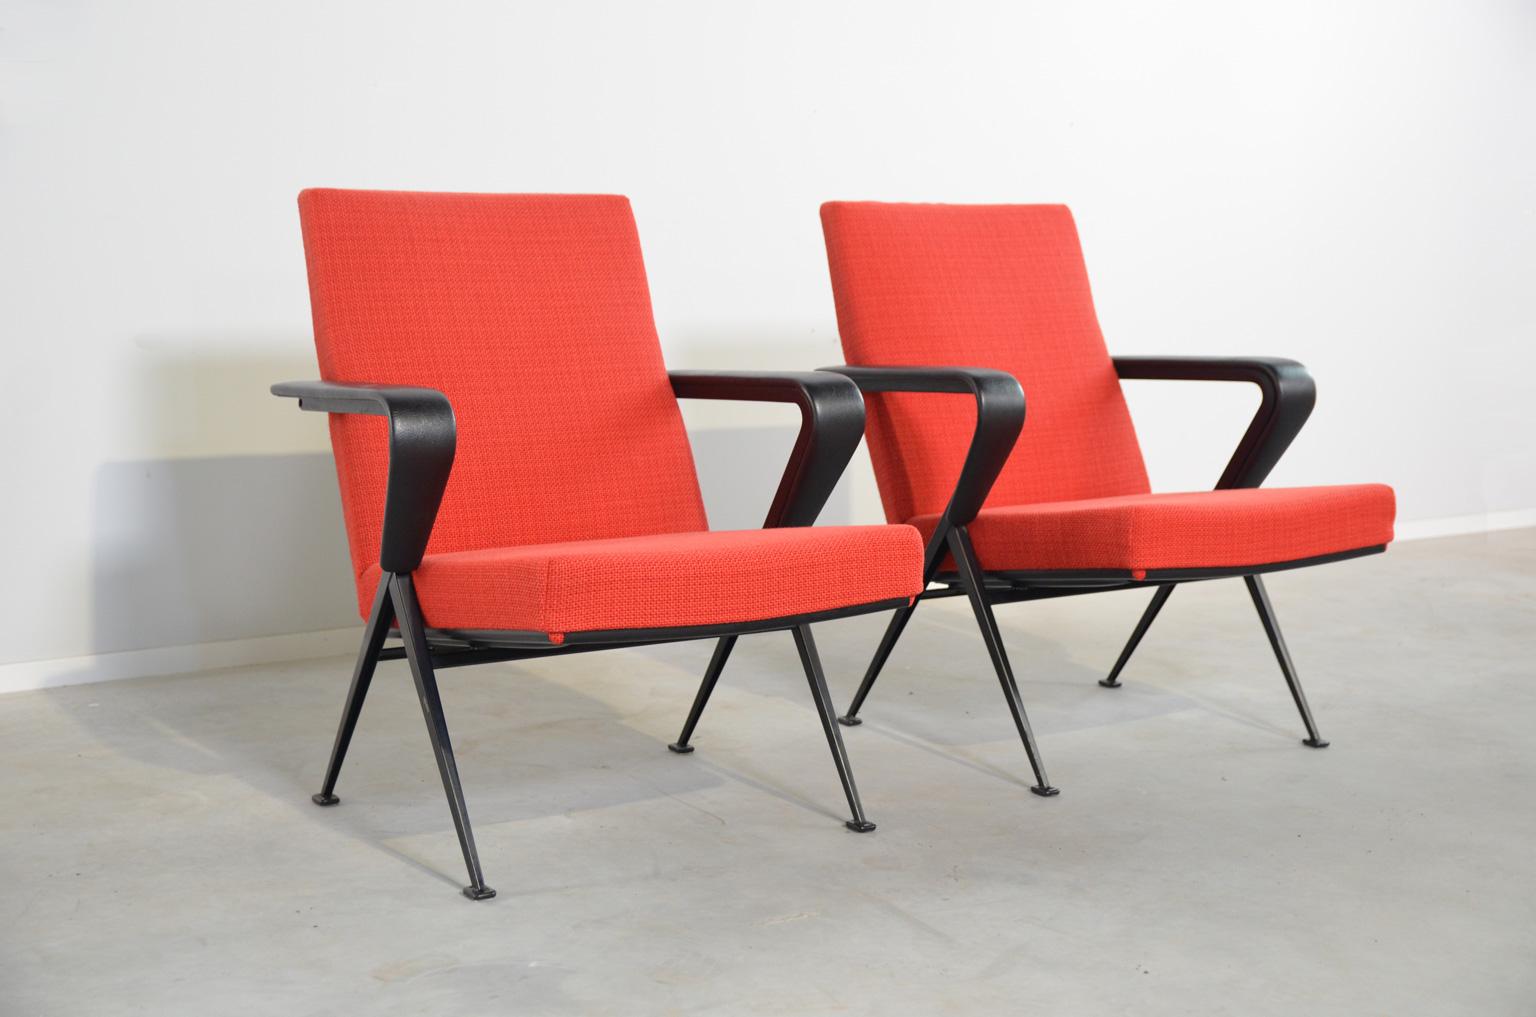 One of Friso Kramer's most important Industrial designs is the Repose lounge chair for Ahrend de Cirkel. The chair has a metal frame which shows the same V-shaped structure as in his other famous designs such as the Revolt and Result chair. This set